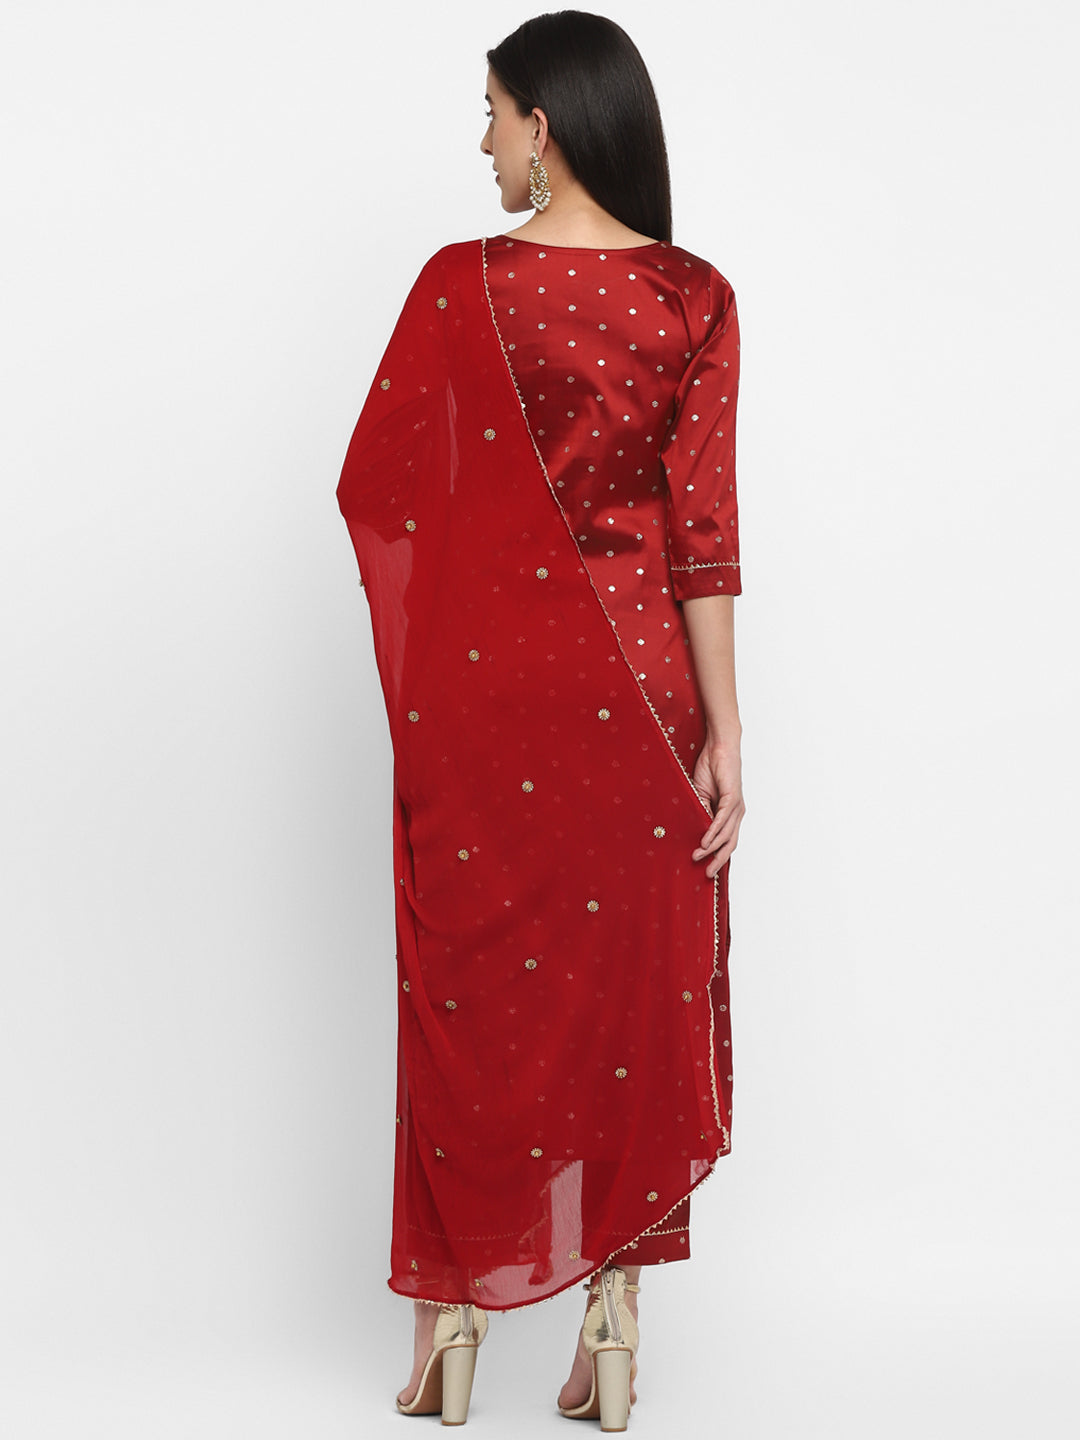 Women's Maroon Color Polyster blend Self Design Kurta Pant With Dupatta  - Final Clearance Sale